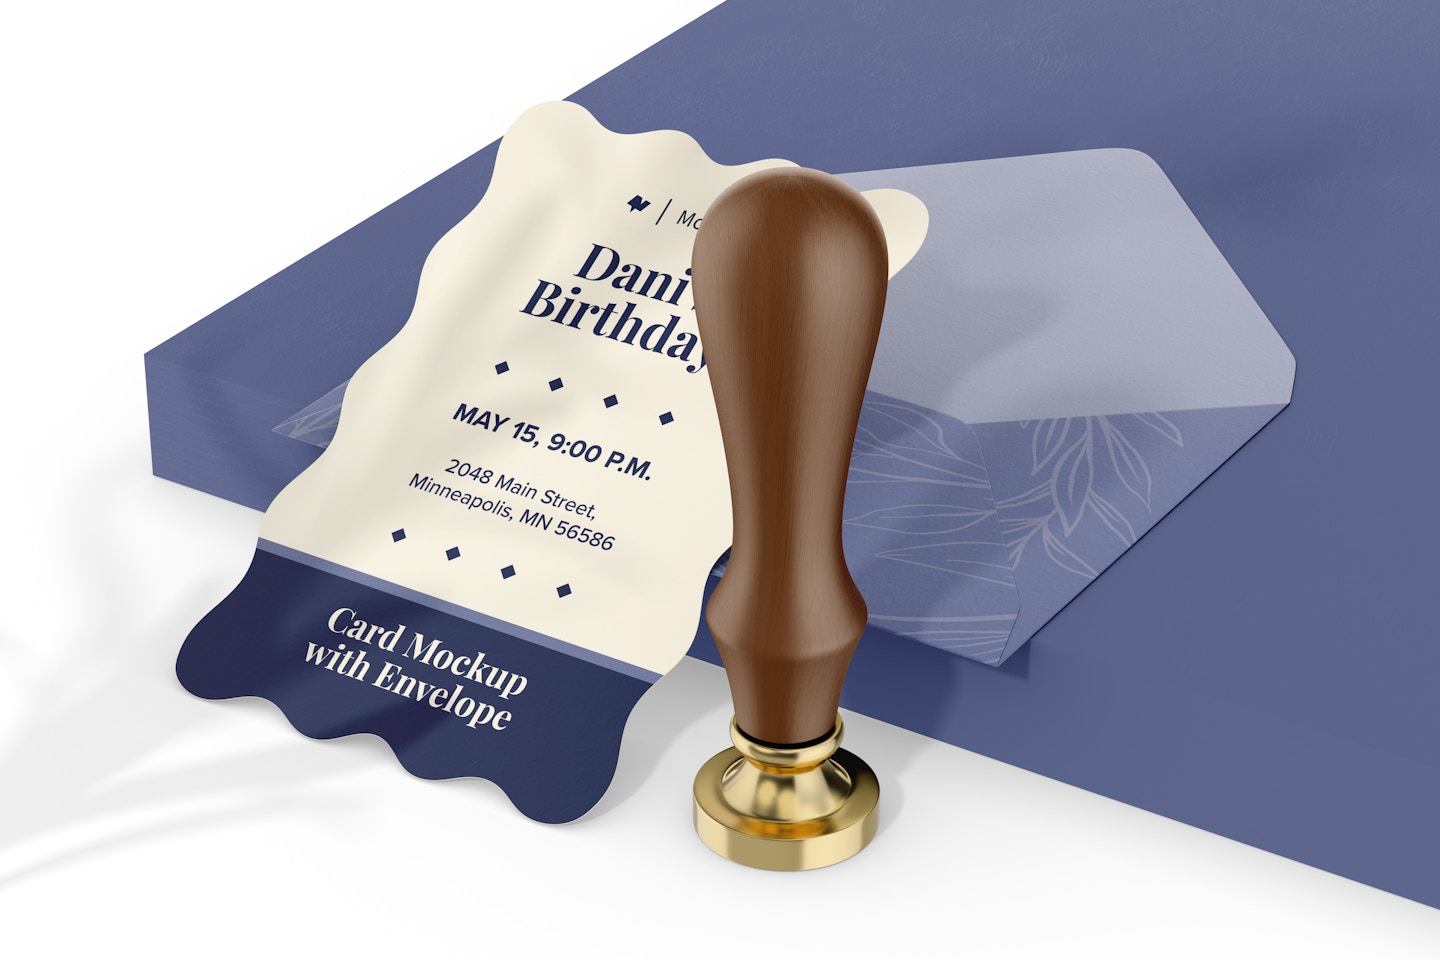 Invitation Card with Envelope Mockup, with Seal